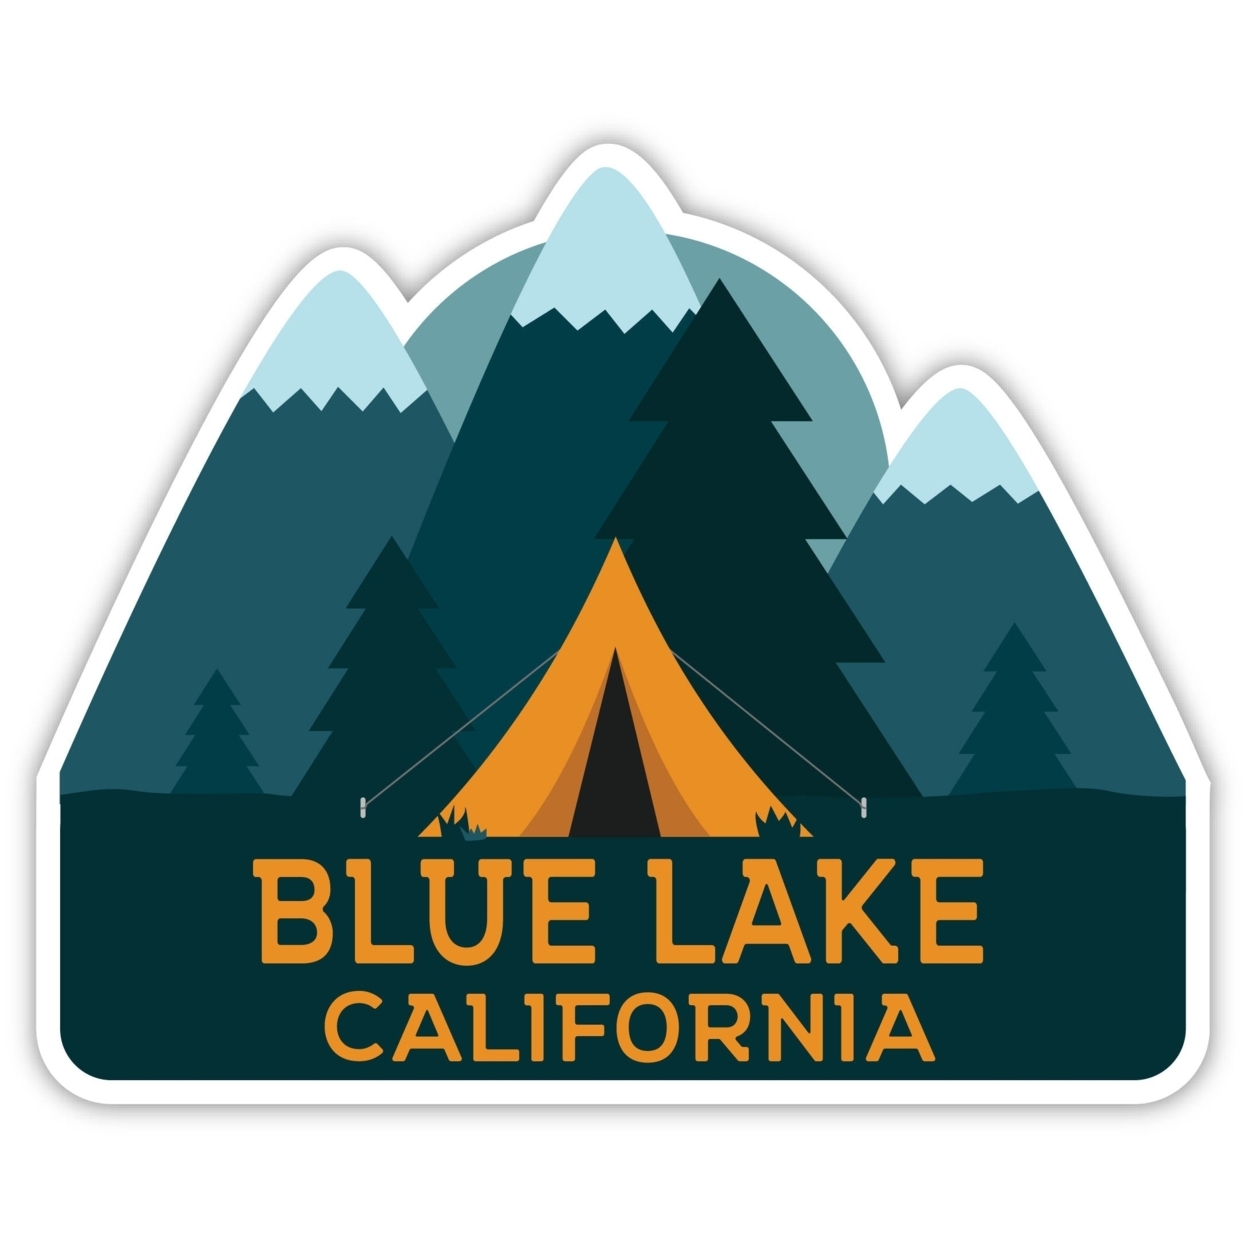 Blue Lake California Souvenir Decorative Stickers (Choose Theme And Size) - 4-Pack, 4-Inch, Tent